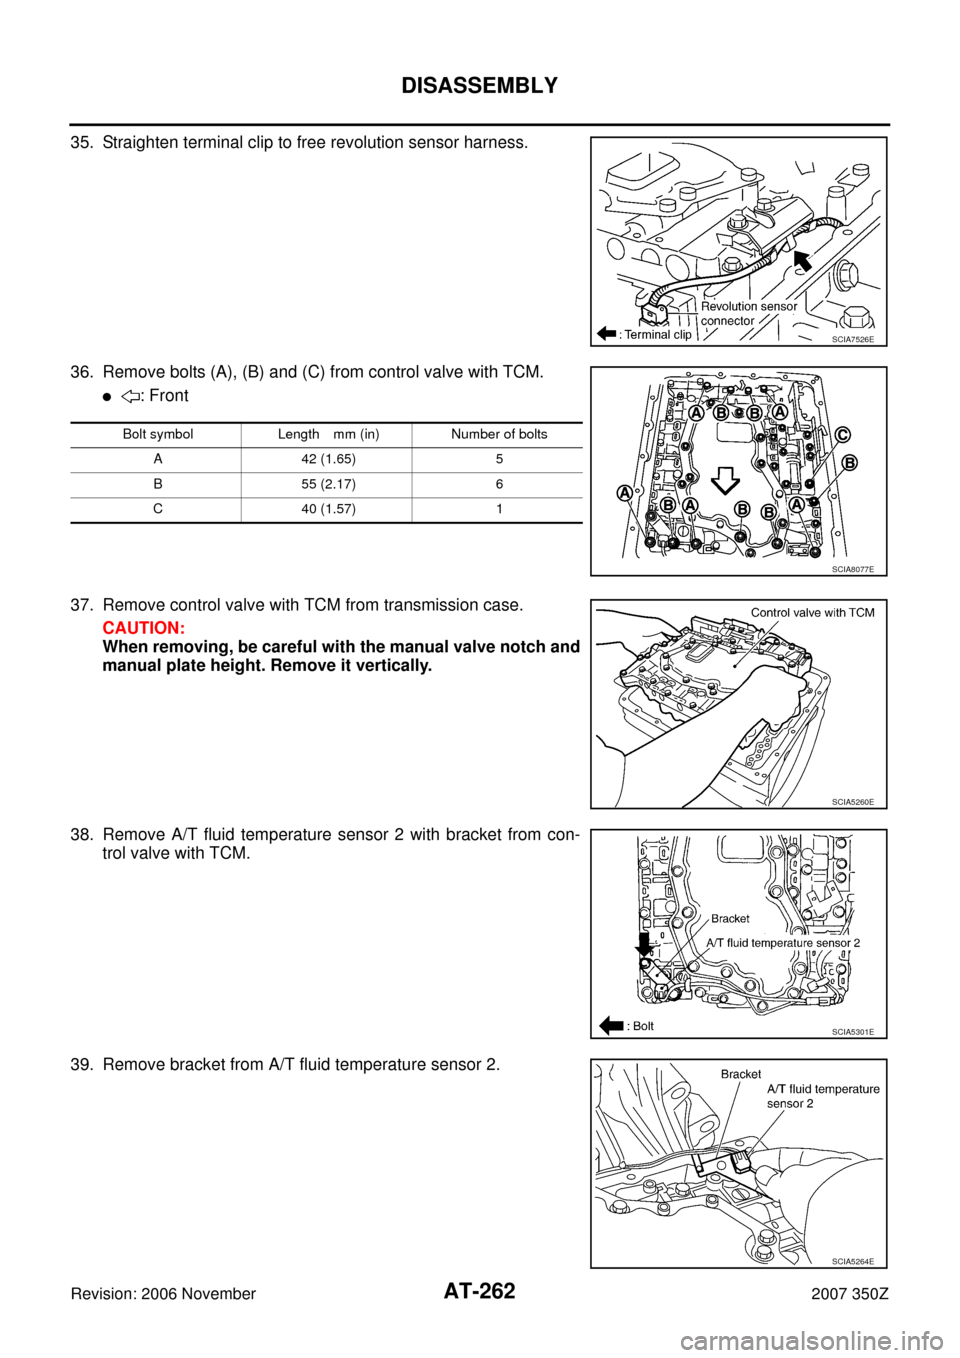 NISSAN 350Z 2007 Z33 Automatic Transmission Workshop Manual AT-262
DISASSEMBLY
Revision: 2006 November2007 350Z
35. Straighten terminal clip to free revolution sensor harness.
36. Remove bolts (A), (B) and (C) from control valve with TCM.
: Front
37. Remove c